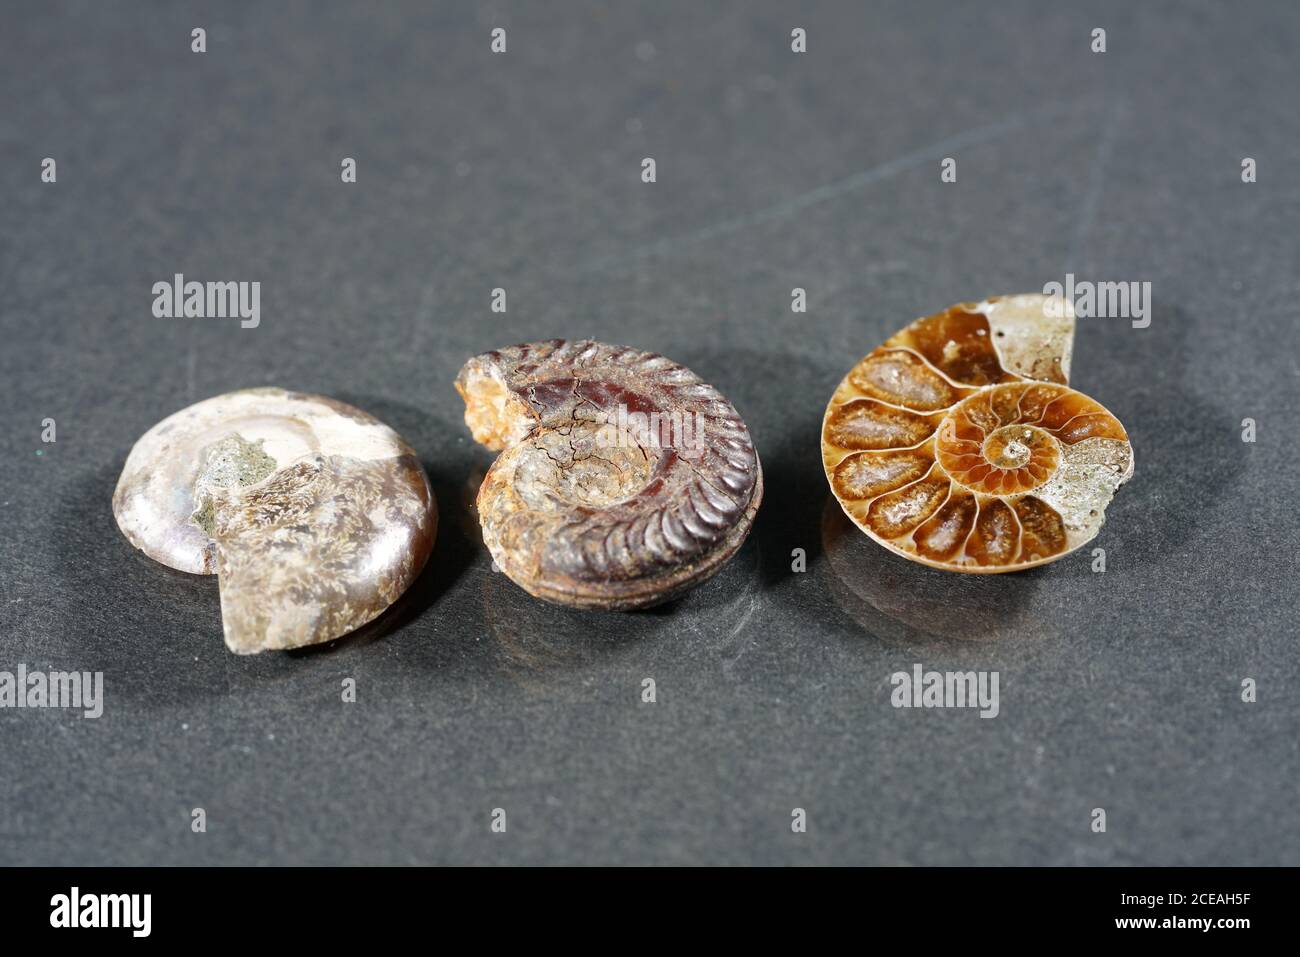 Closeup shot of ammonite fossils on a grey table Stock Photo